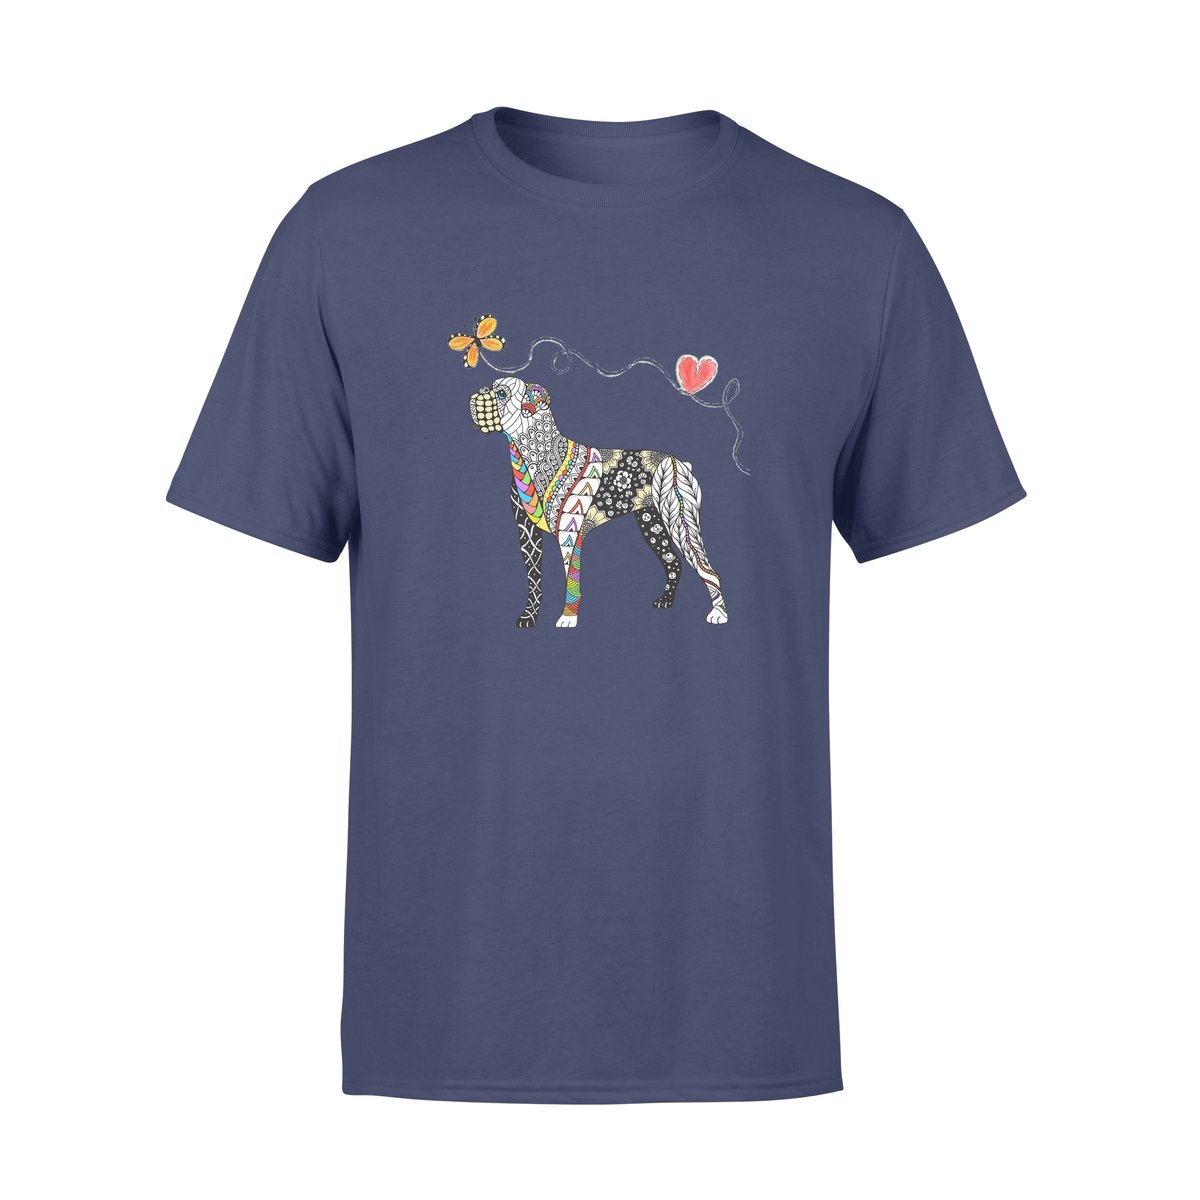 Zentangle Rainbow Boxer – Standard T-Shirt, Gift For Dog Lover, Gift For Bull Terrier Lover T-Shirt Hoodie All Color Size S-5Xl